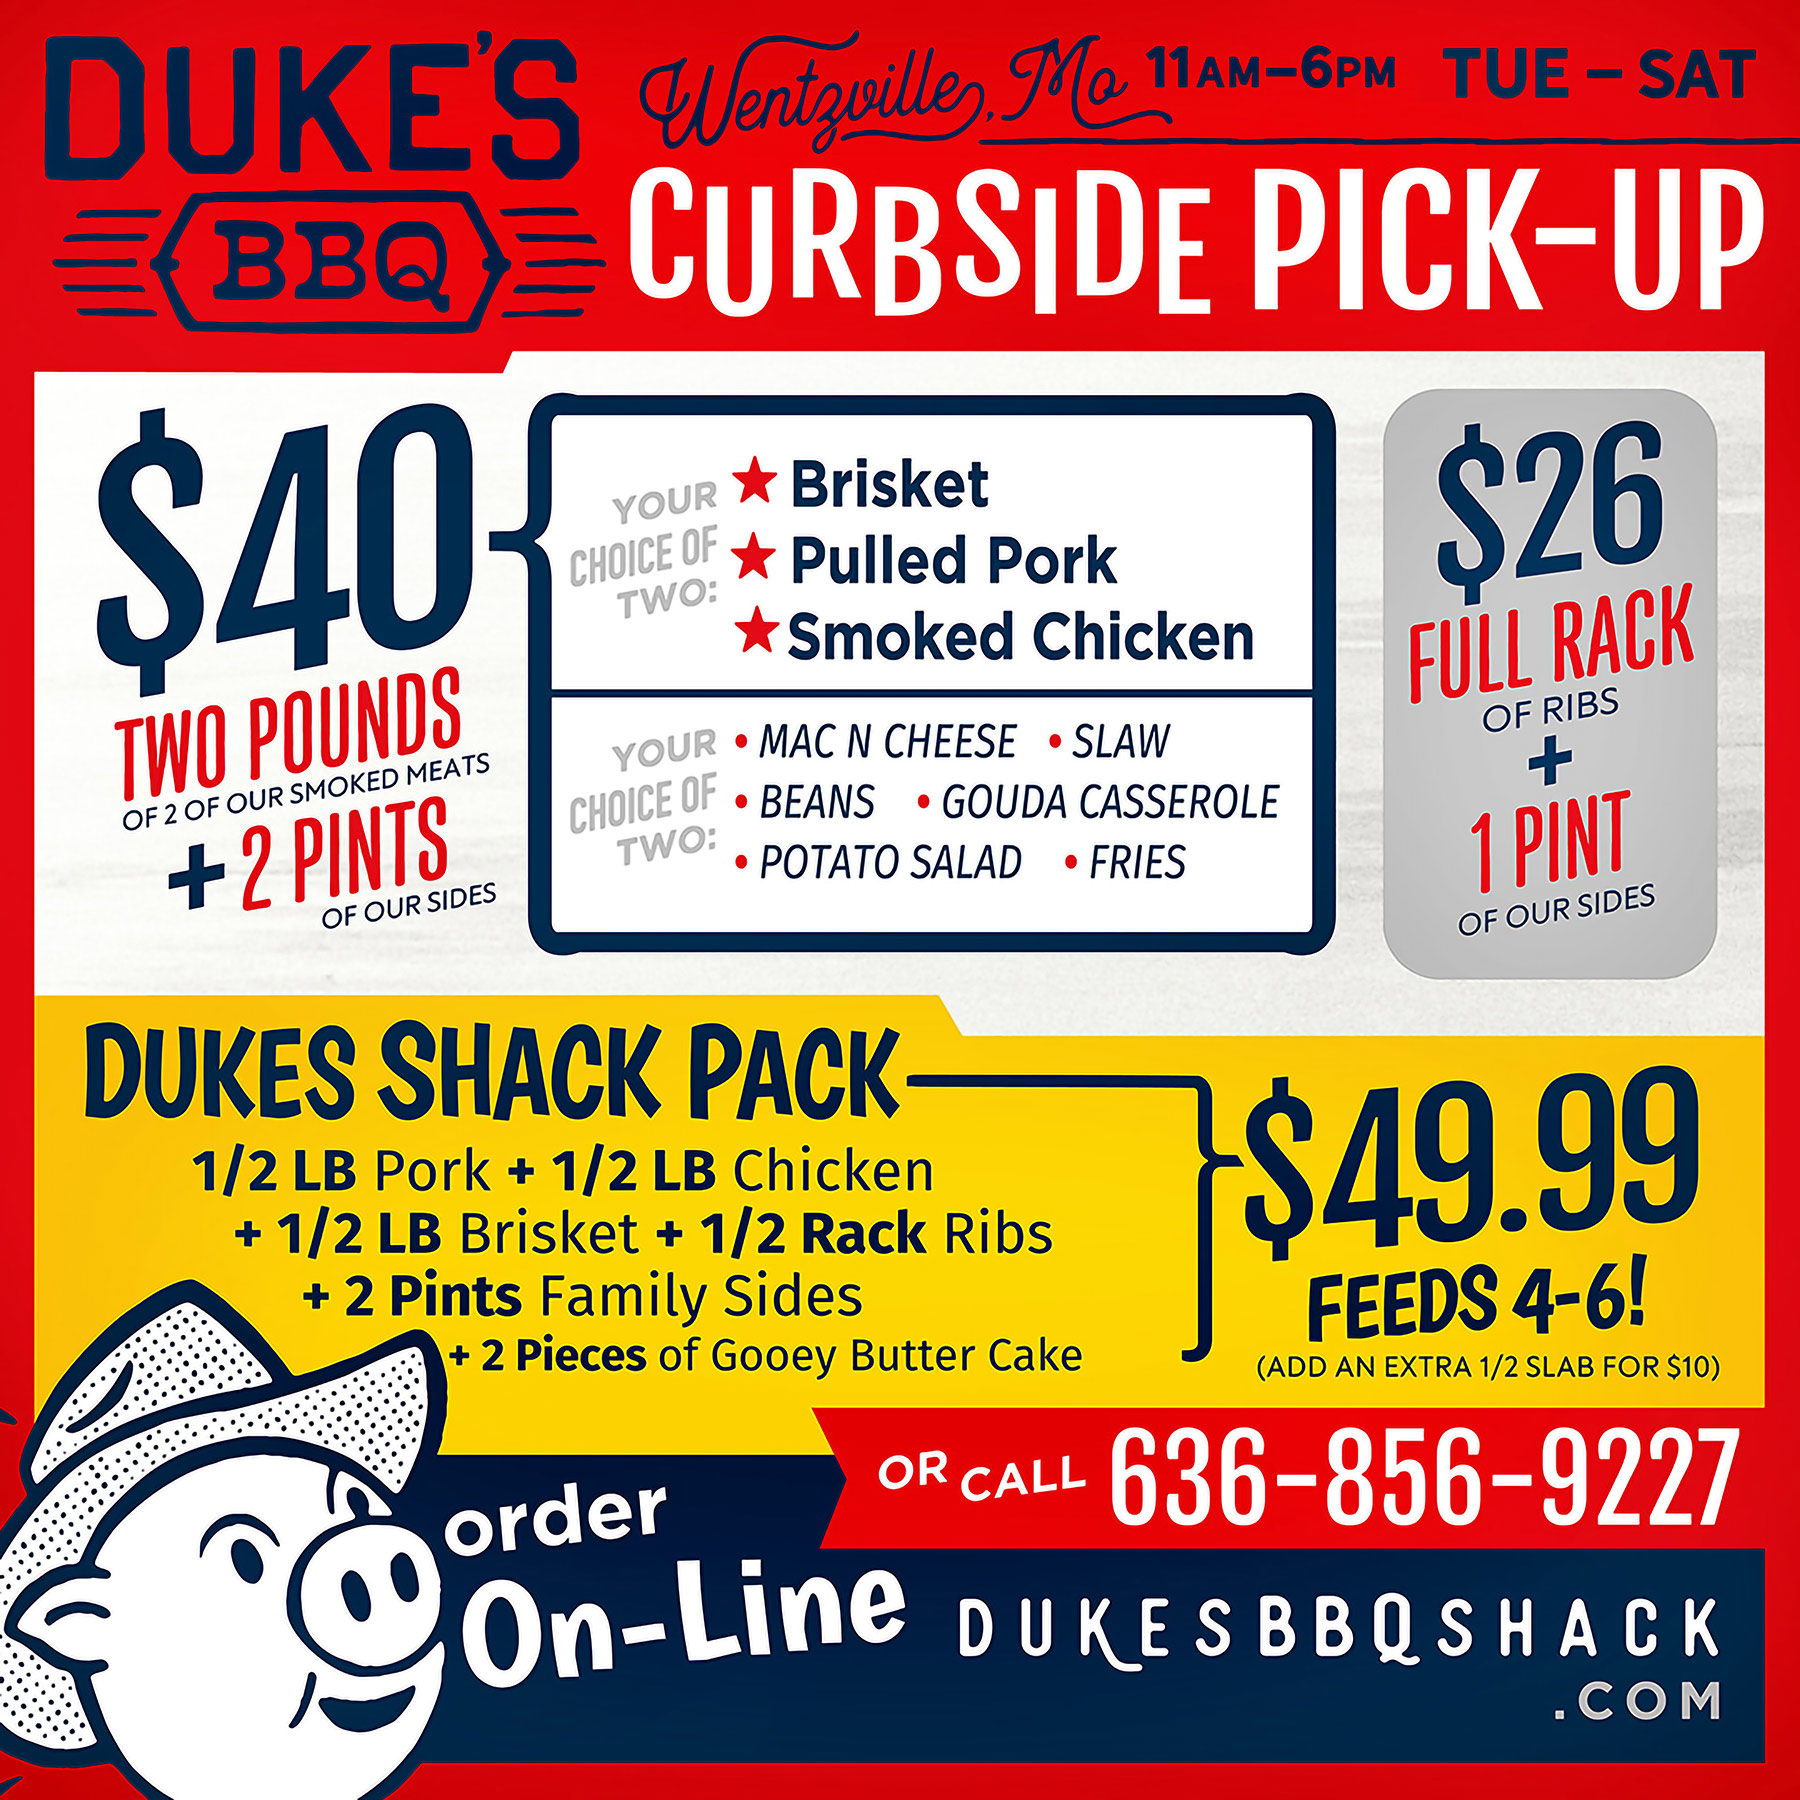 Dukes BBQ Shack Located in Historic downtown Wentzville under the